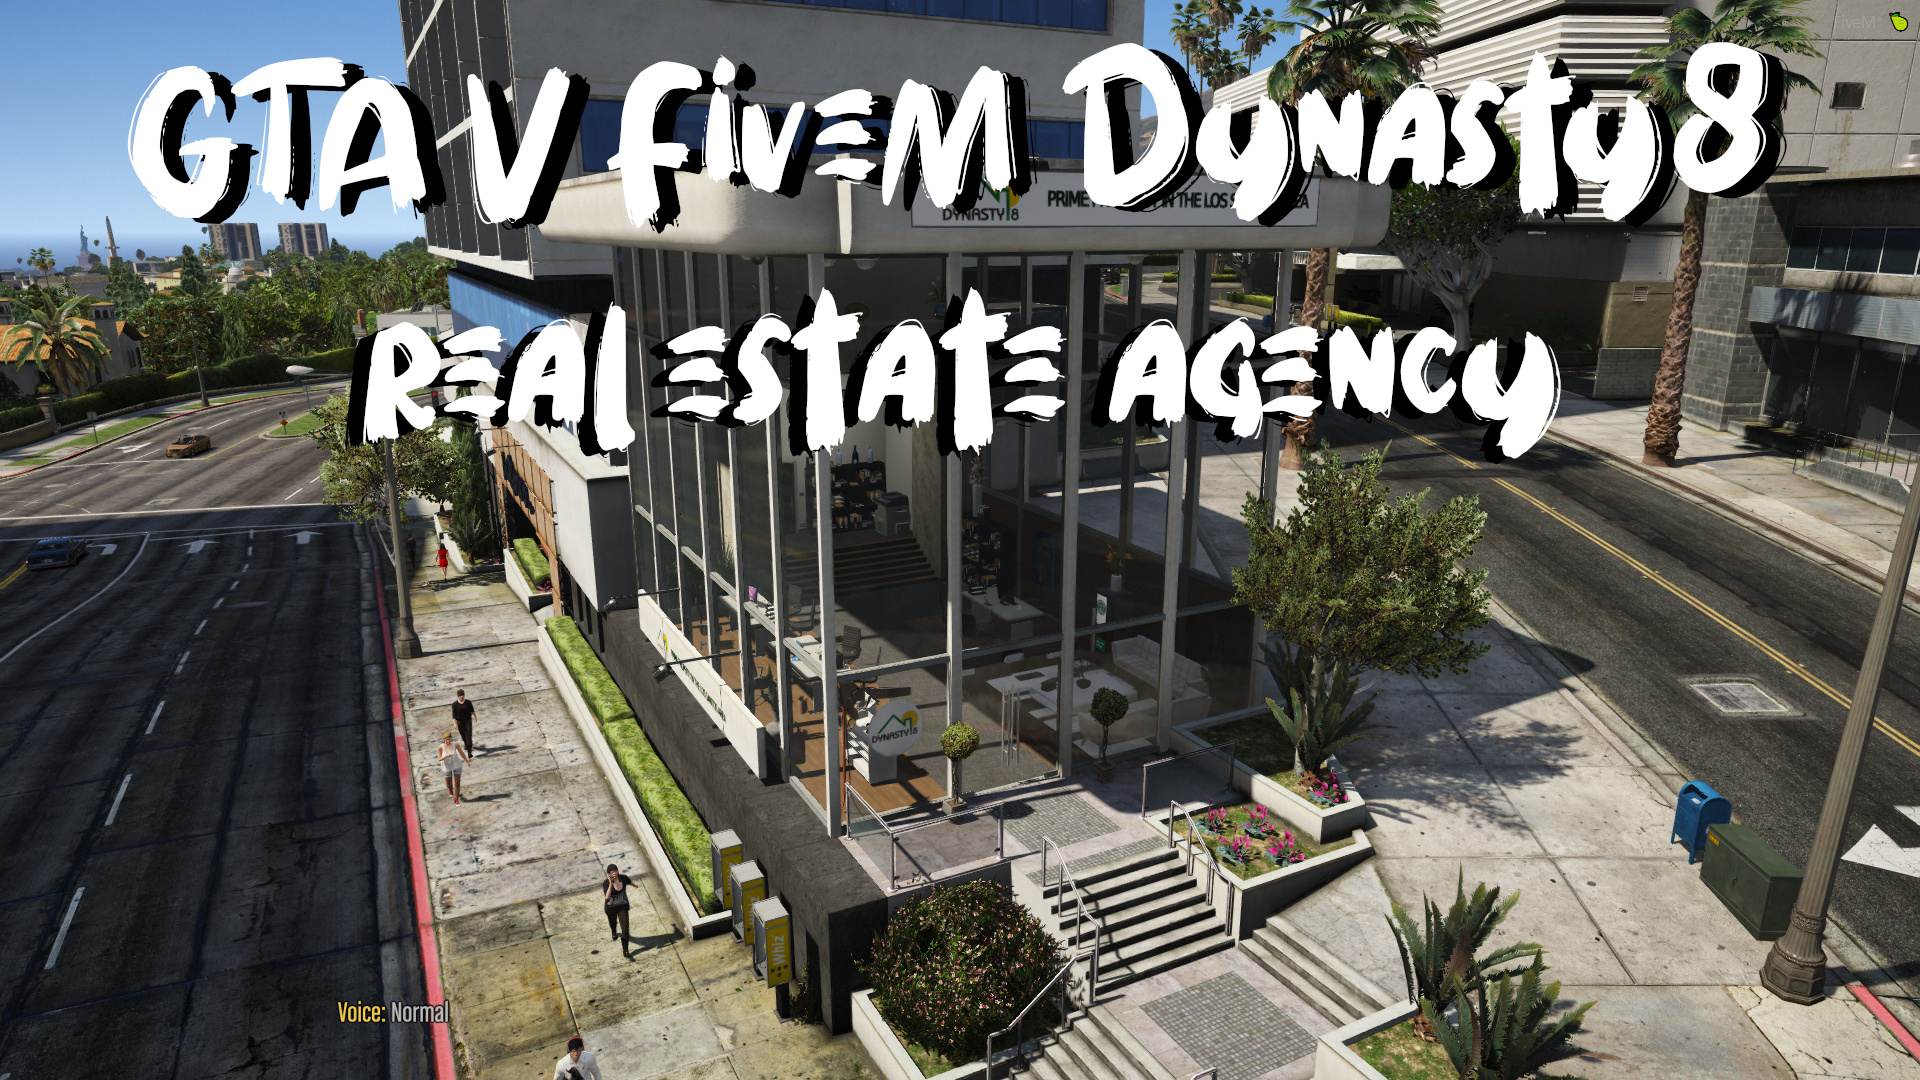 You are currently viewing GTA V FiveM Dynasty8 Immobilienagentur MLO